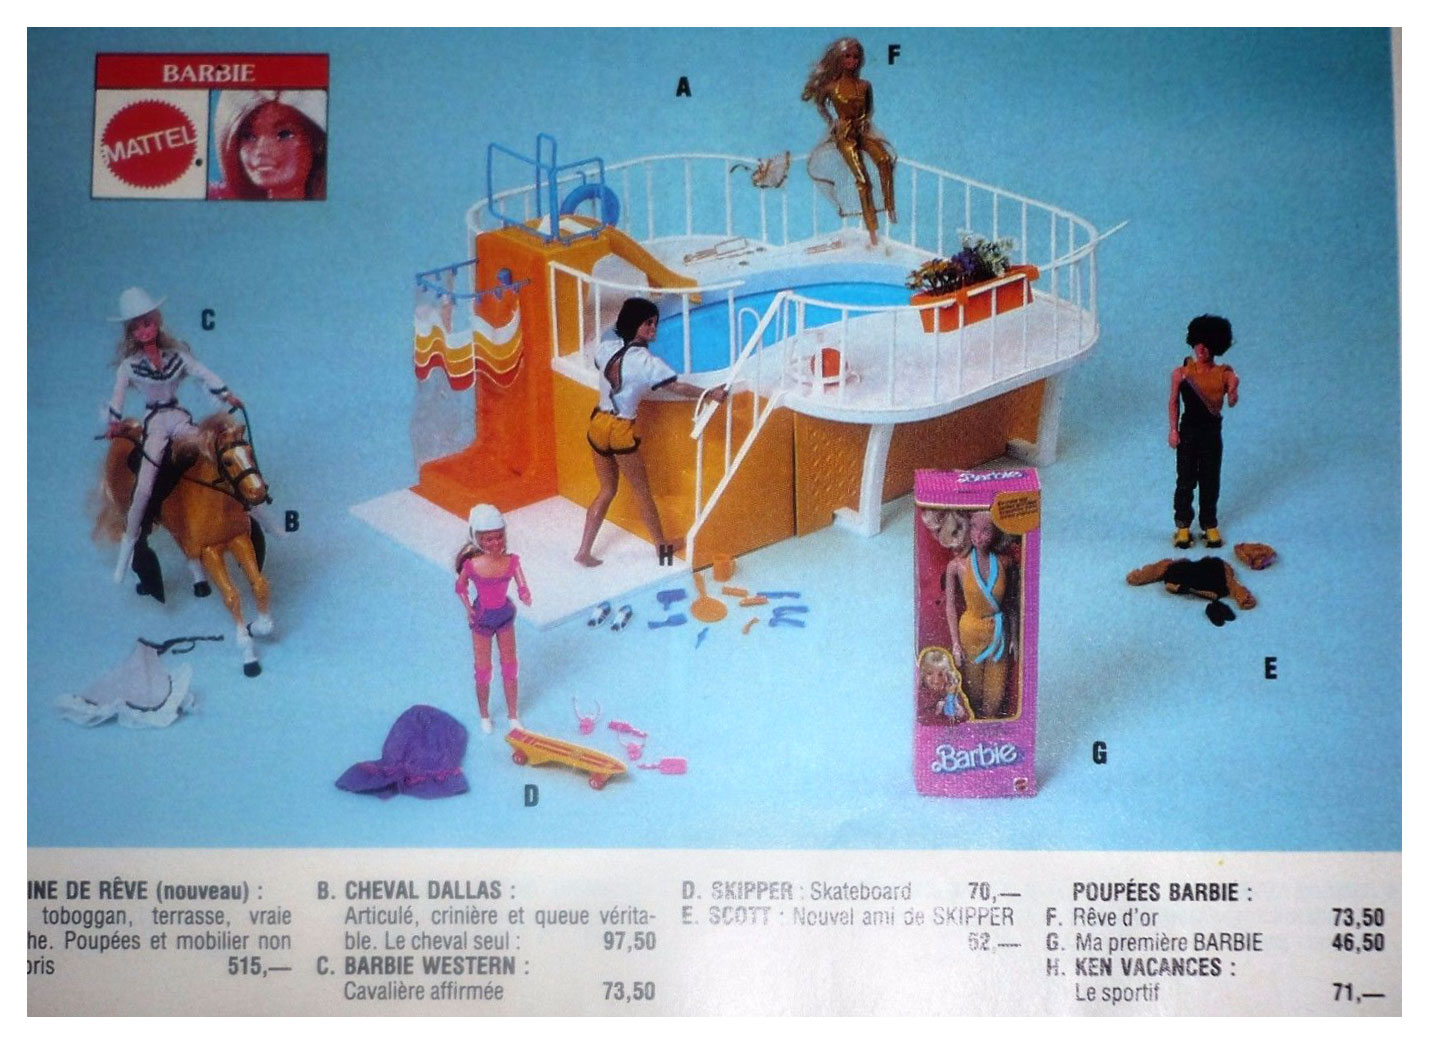 From 1981 French Jouets S.A.J. catalogue